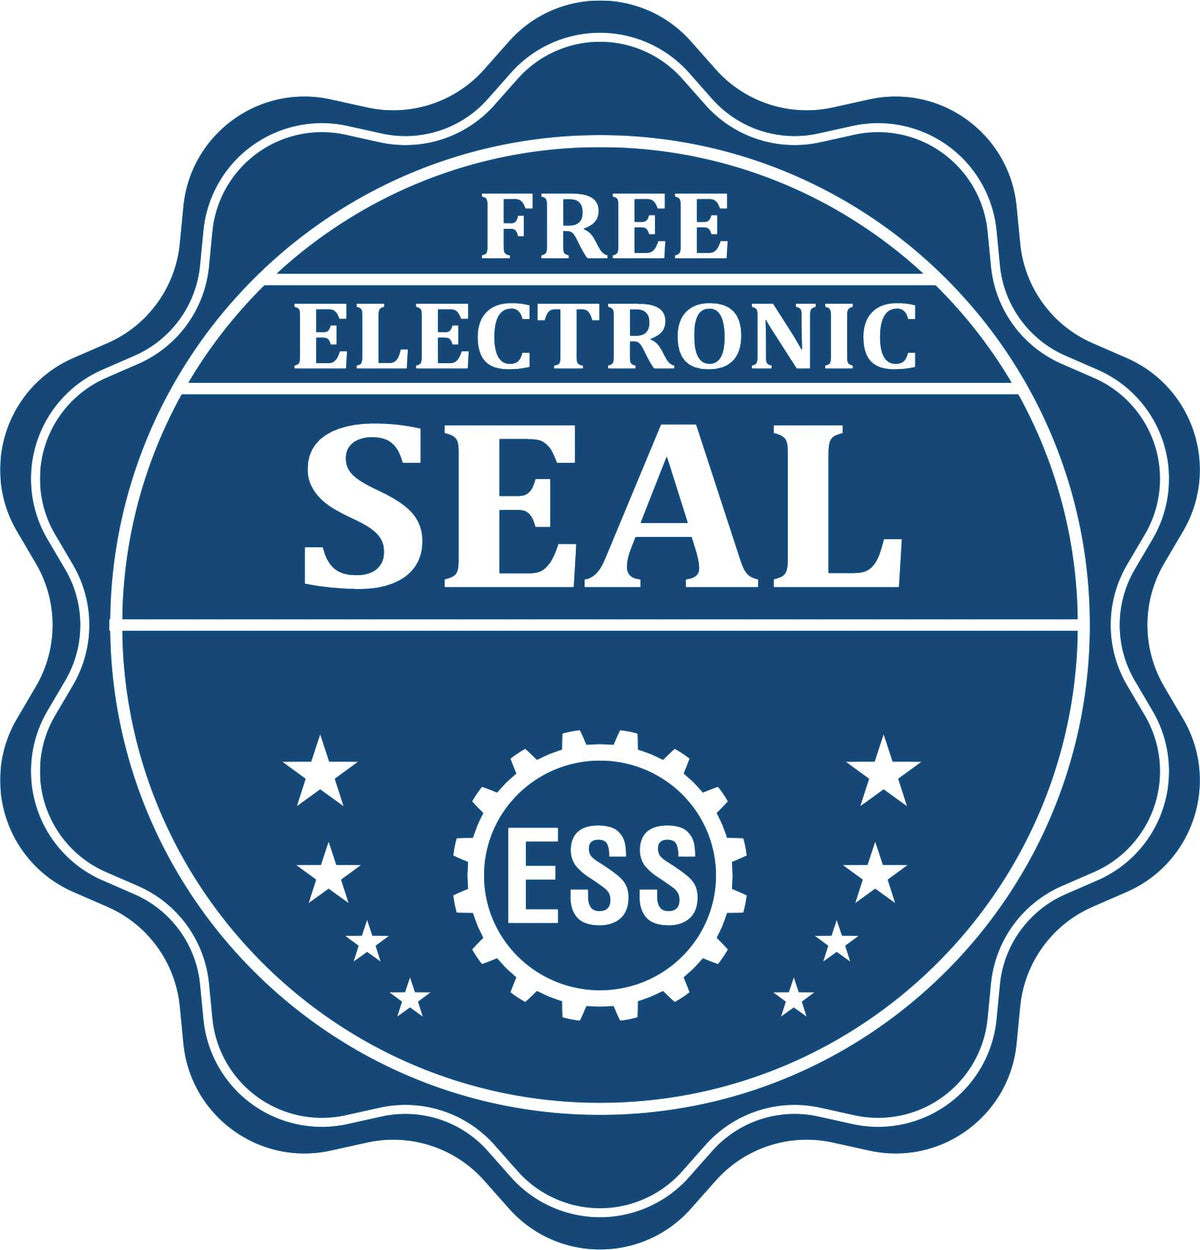 A badge showing a free electronic seal for the Hybrid Vermont Geologist Seal with stars and the ESS gear on the emblem.